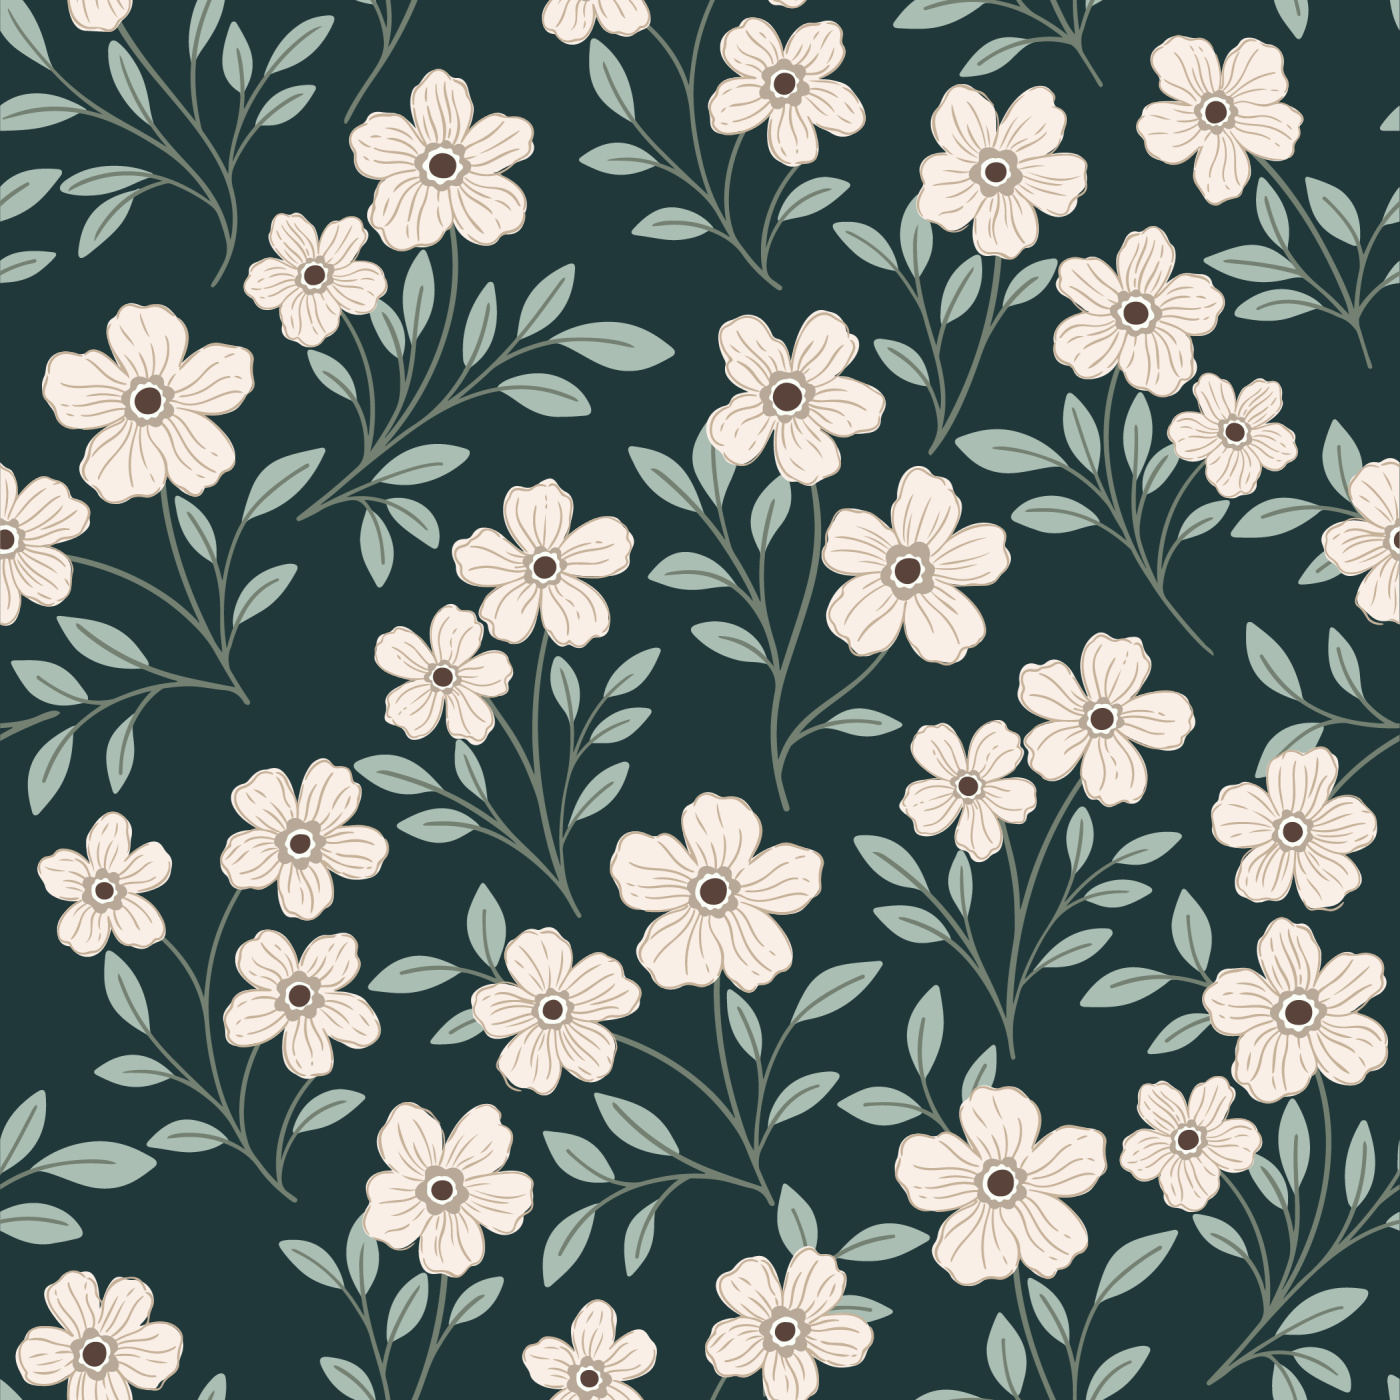 Whimsy Blossoms Wallpaper